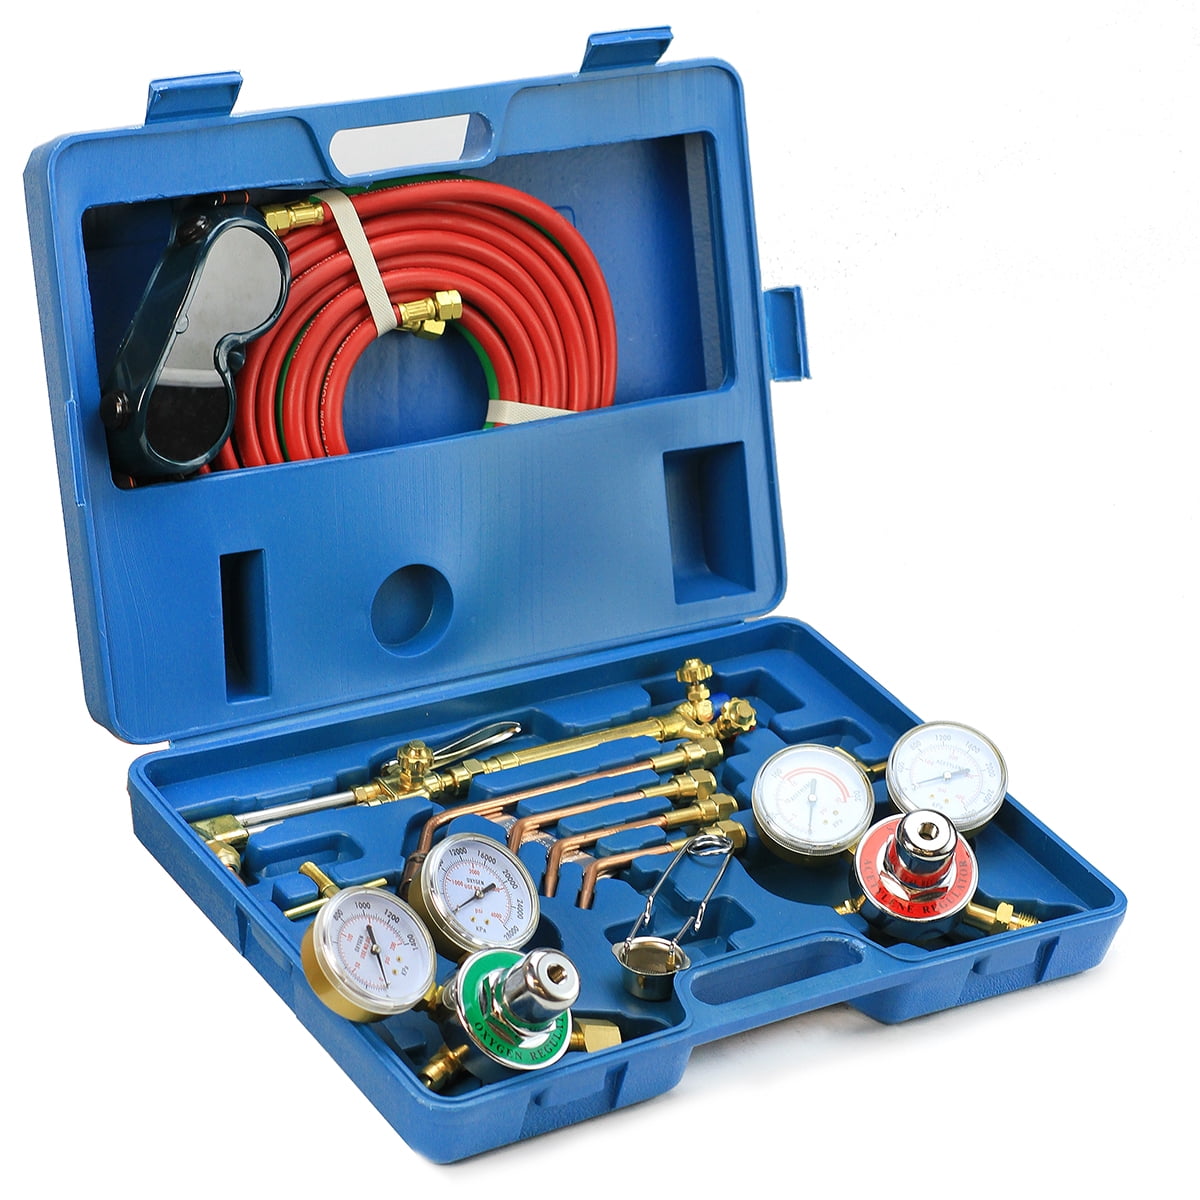 Gas Welding and Cutting KitVictor Type 250 System Oxygen Torch Set Regulator 